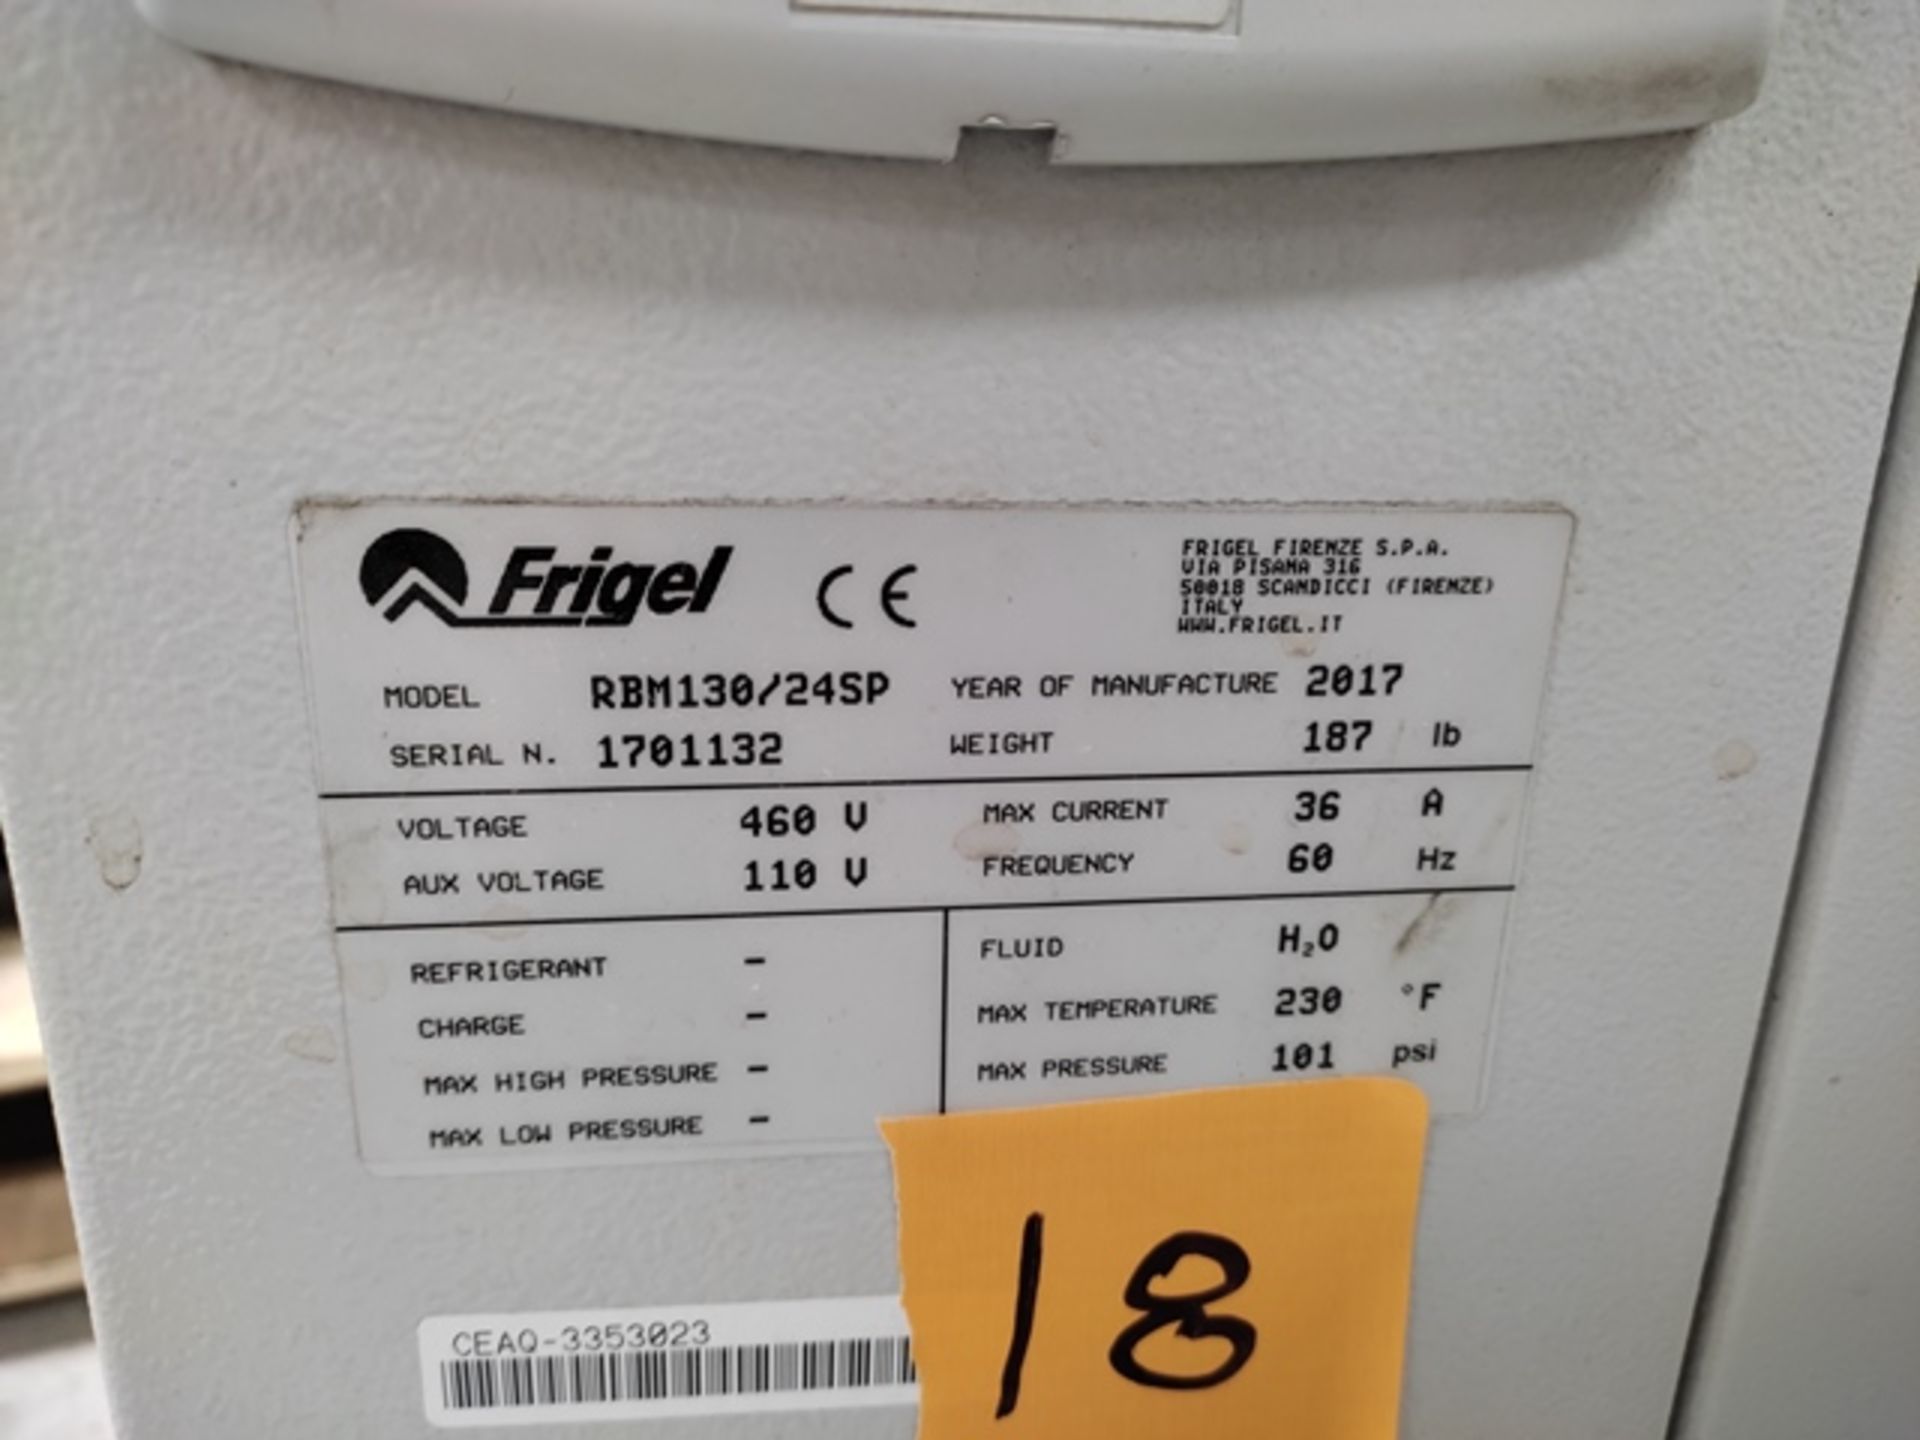 Lot of: (2) Frigel RBM130/24 SP 24 KW Flow Booster Temperature Controllers, Mfg. Year: 2017 - Image 8 of 9